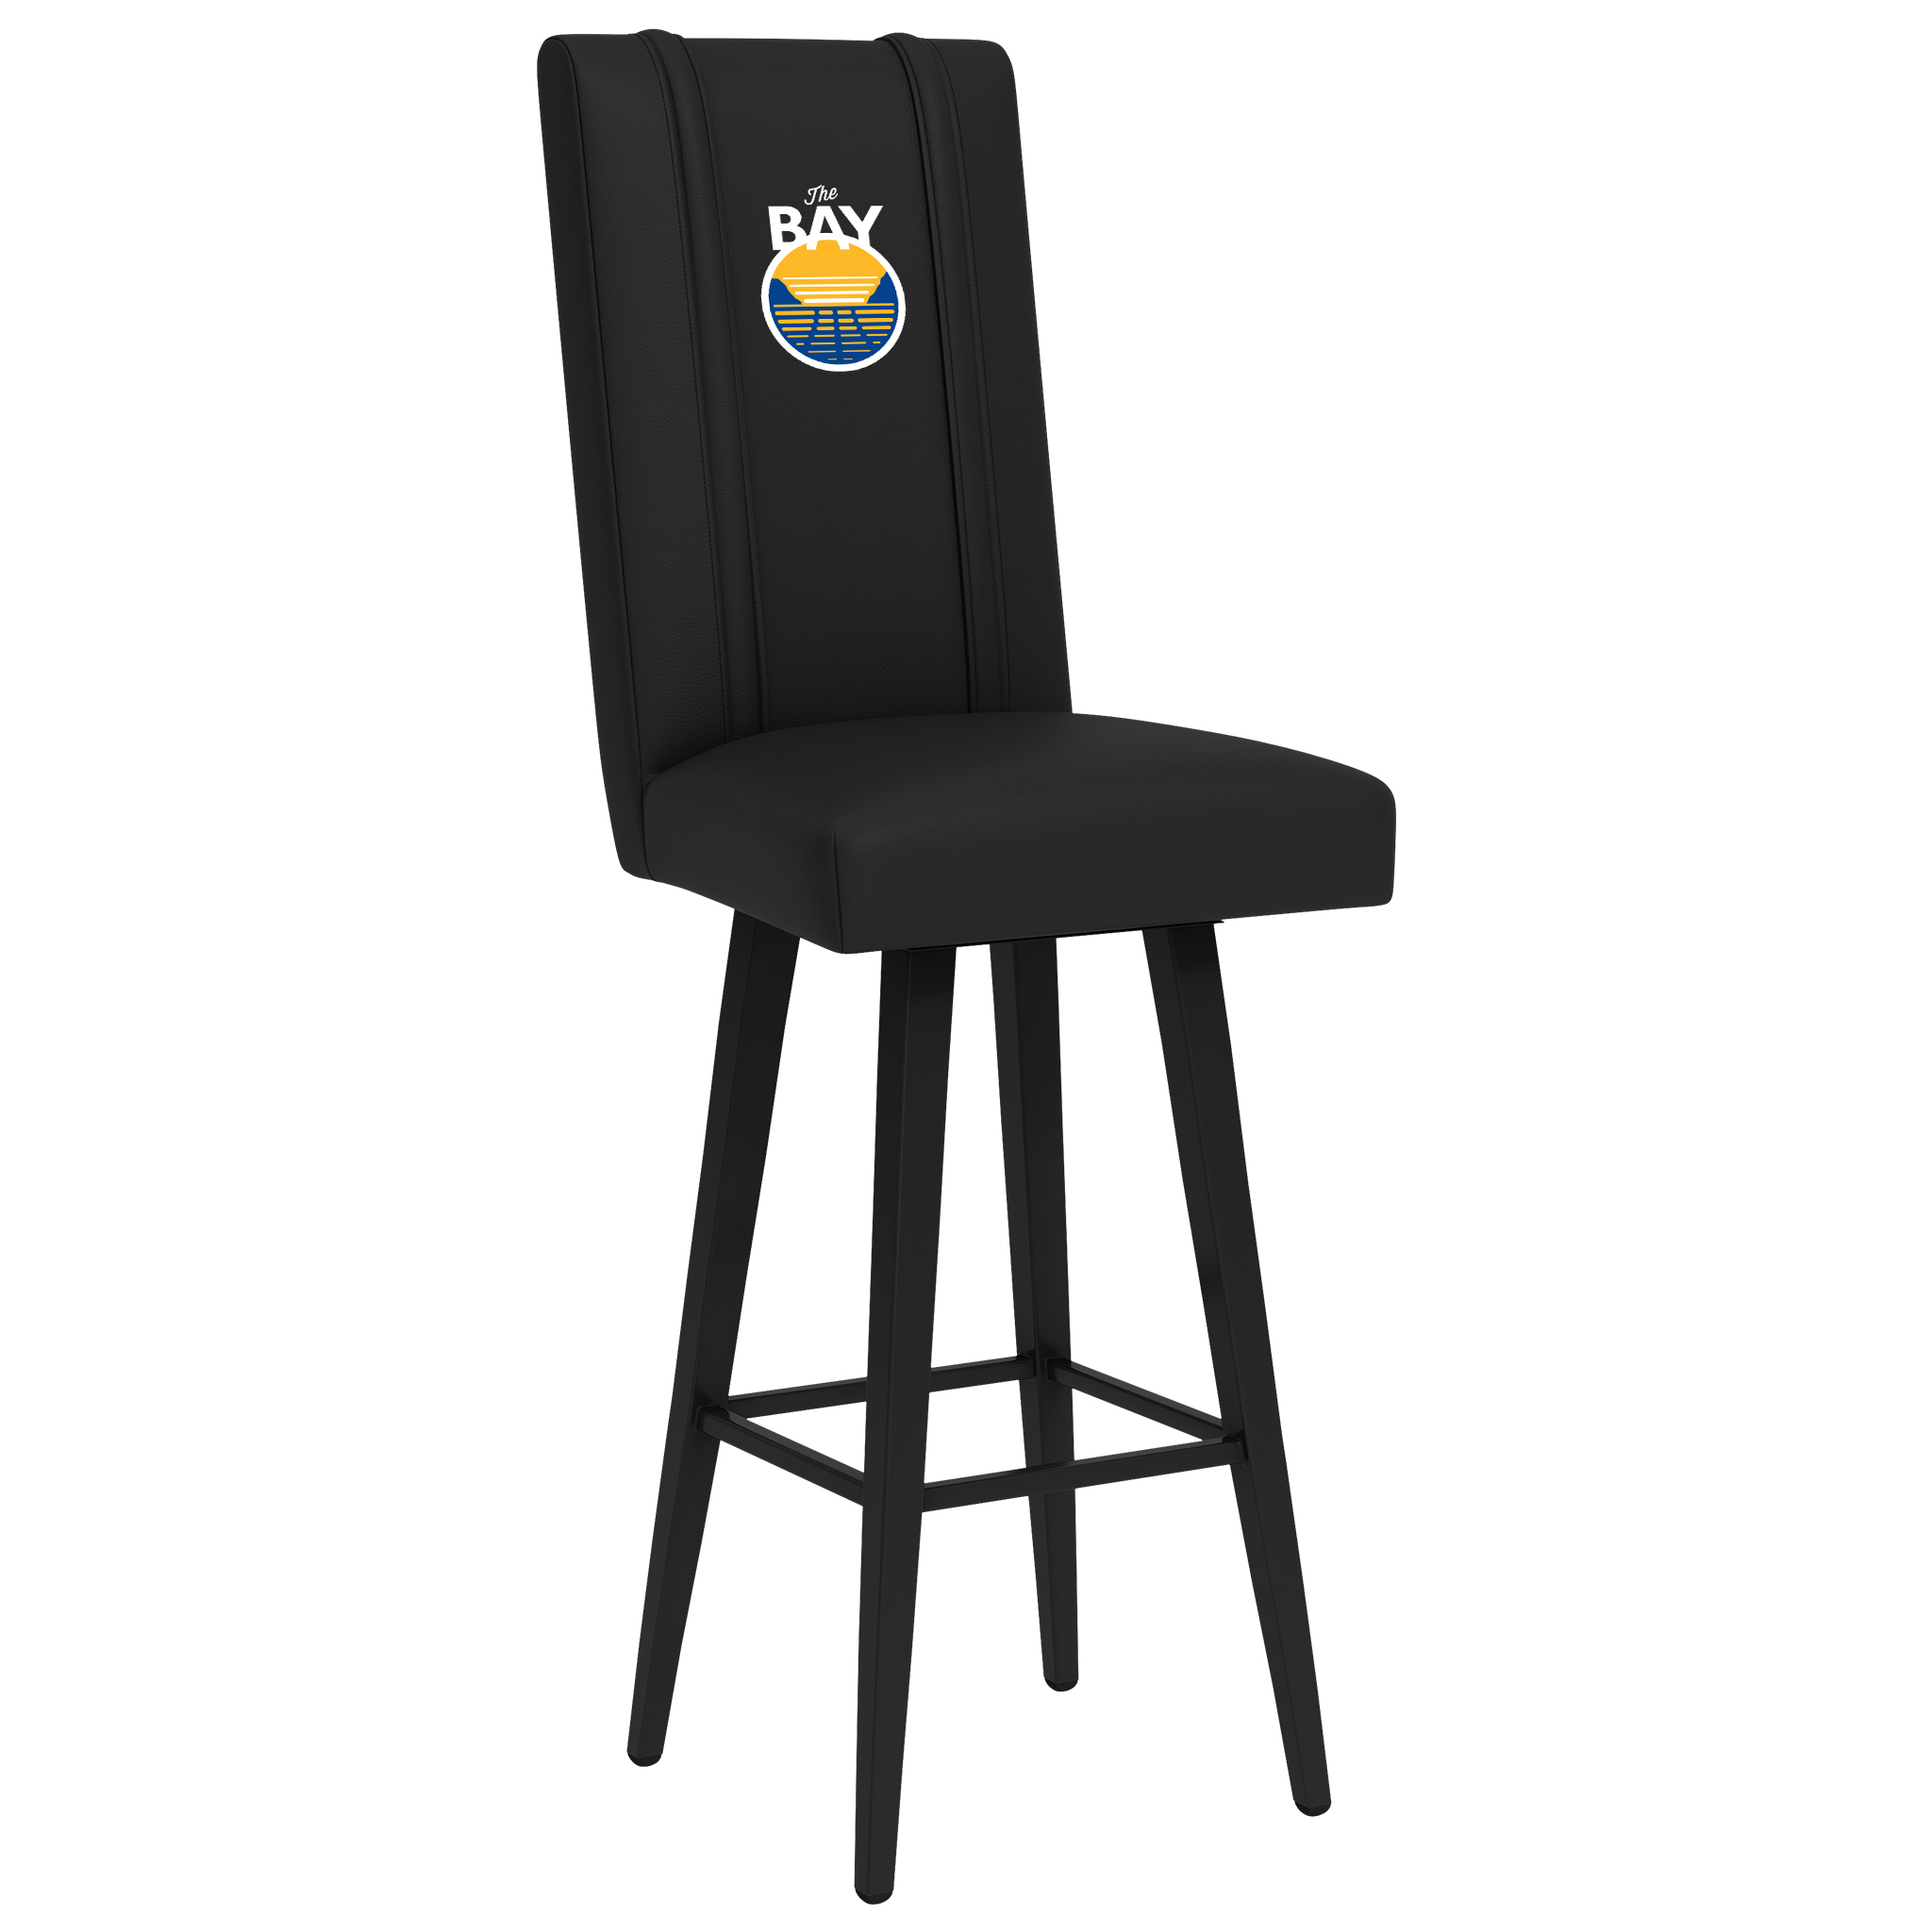 Golden State Warriors Swivel Bar Stool 2000 With Golden State Warriors Secondary Logo